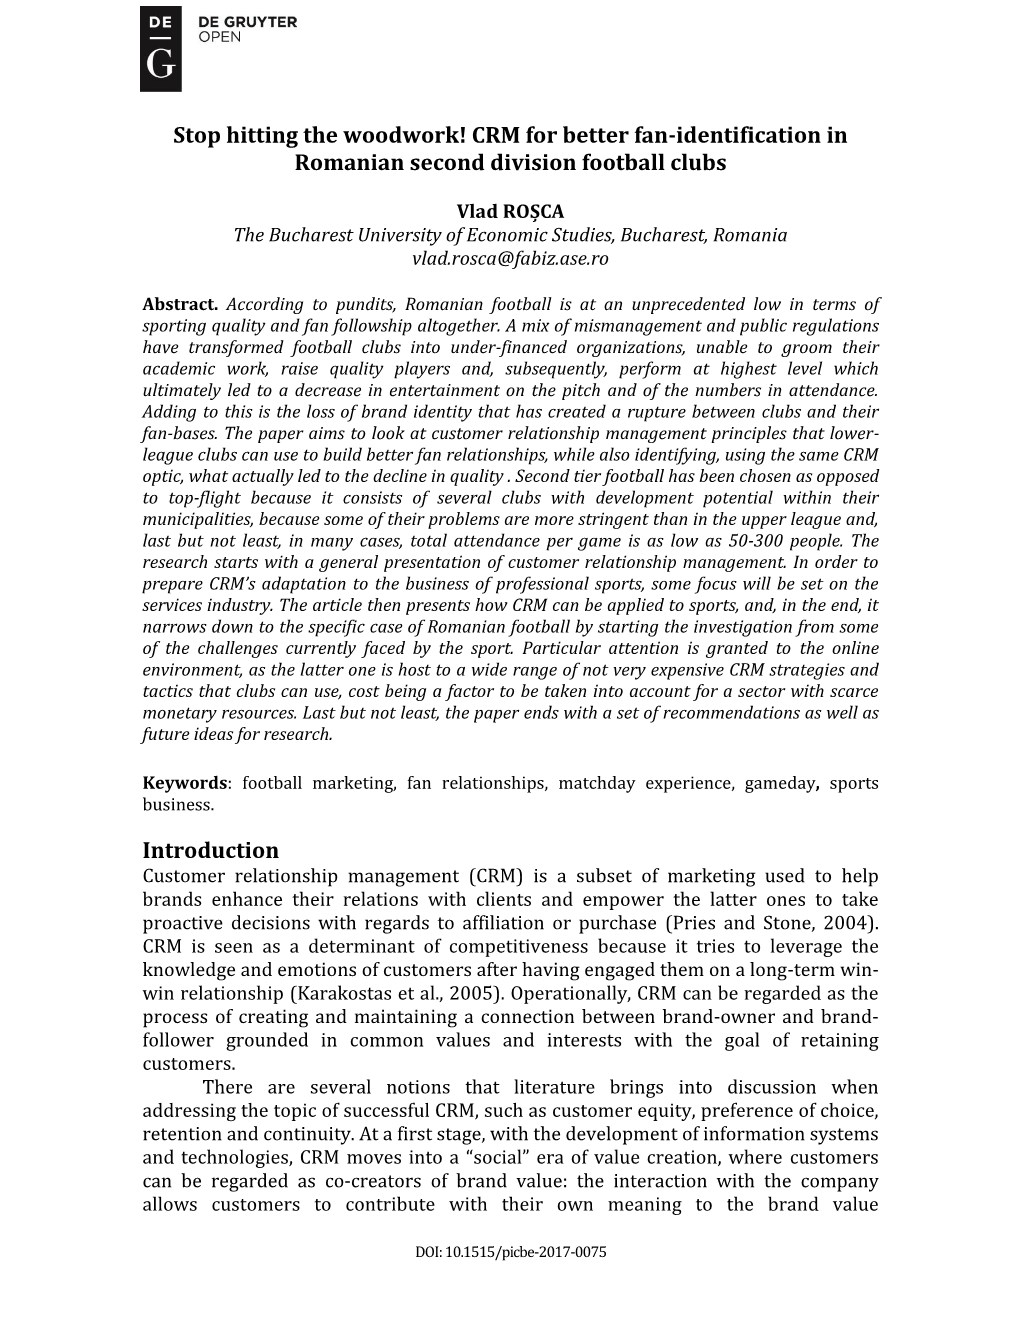 CRM for Better Fan-Identification in Romanian Second Division Football Clubs